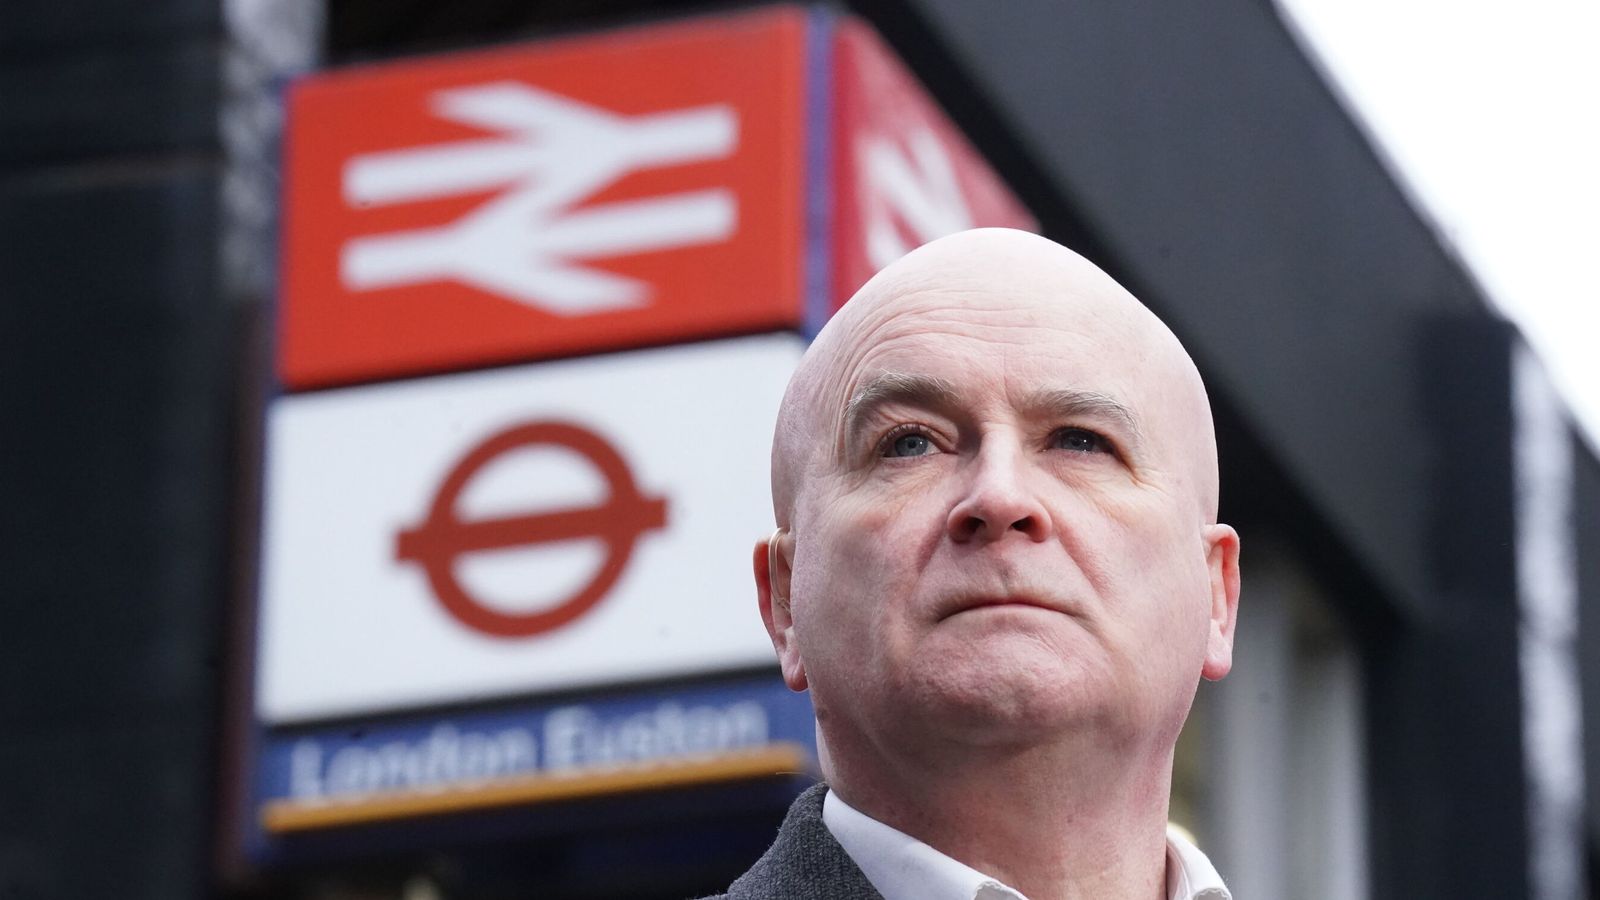 RMT's Mick Lynch insists rail strikes 'have been a success' despite lack of pay deal after almost a year